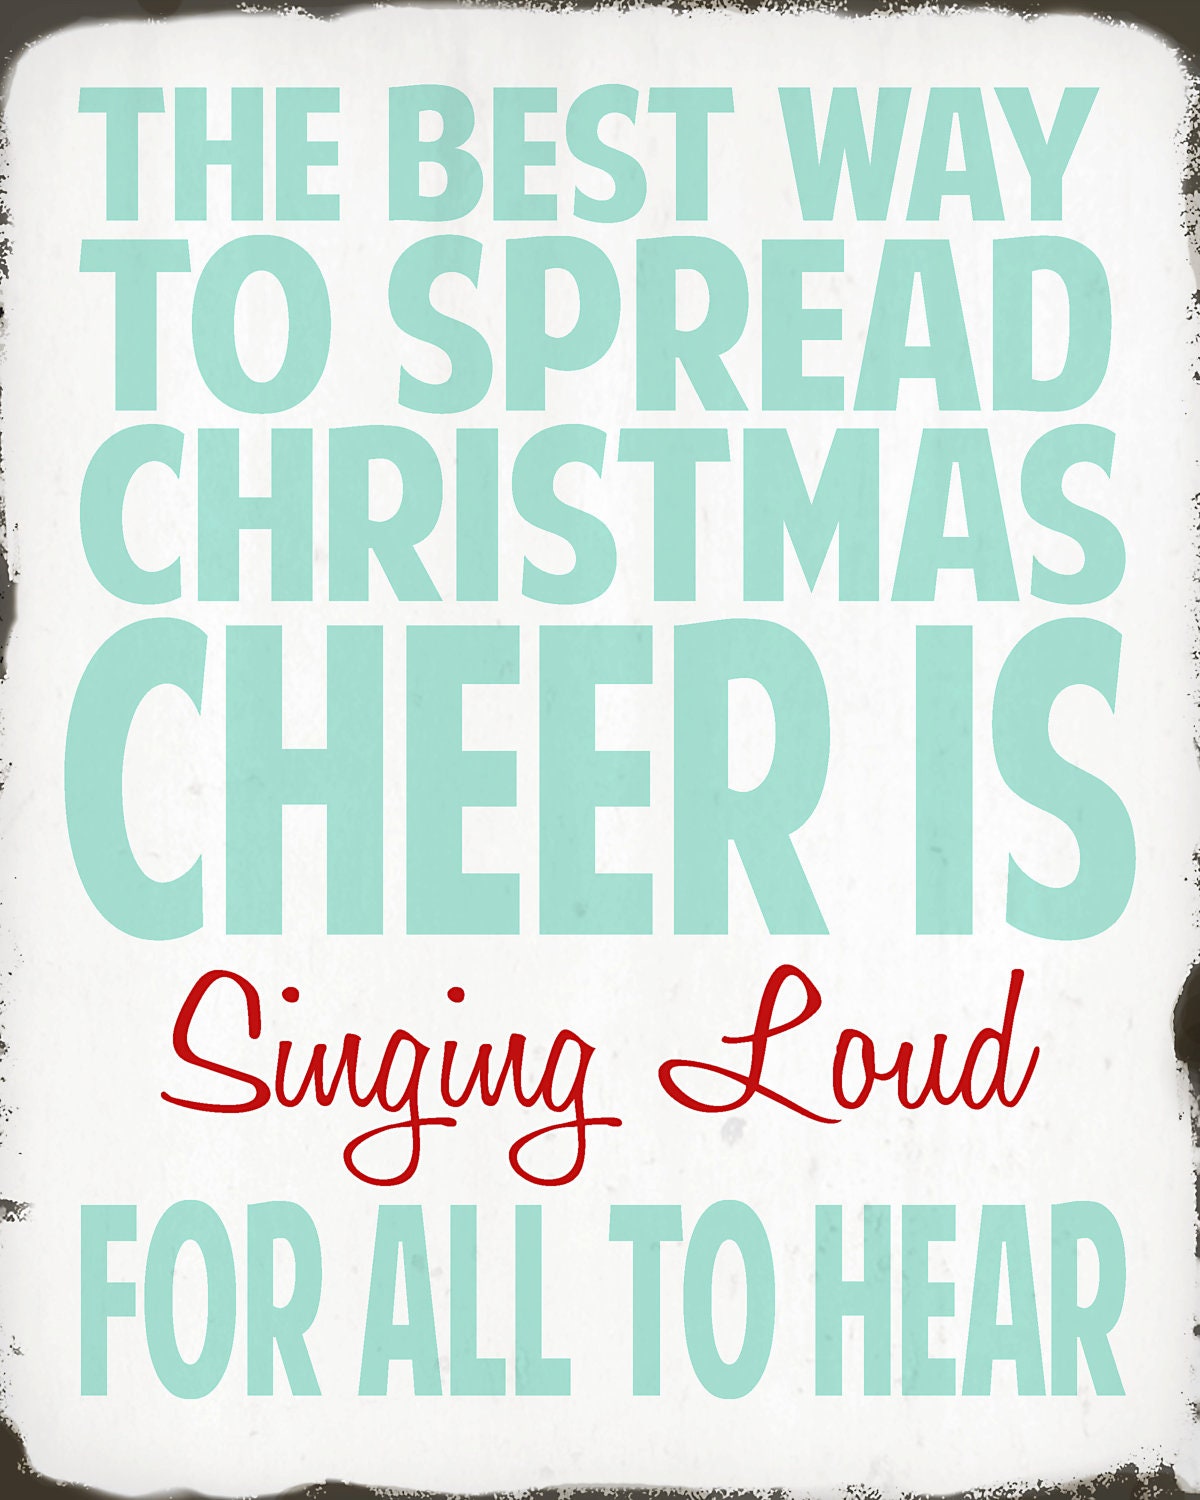 The Best Way To Spread Christmas Cheer Is Singing Loud For All To Hear - 8x10 - Aqua, Blue, Red, White - ADoseOfDani